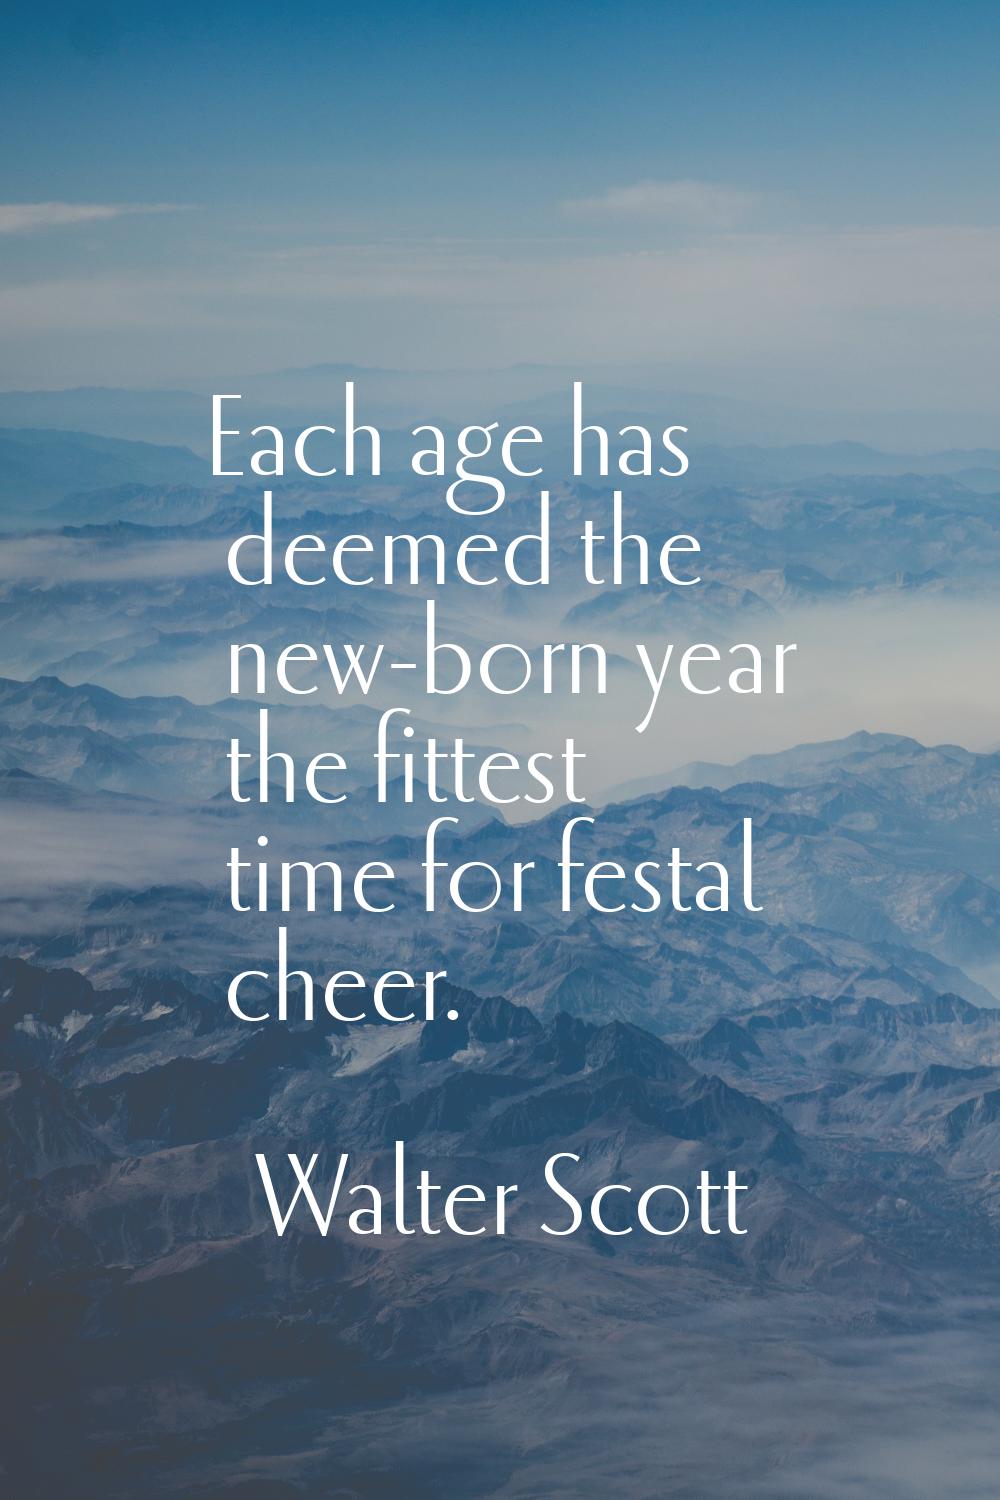 Each age has deemed the new-born year the fittest time for festal cheer.